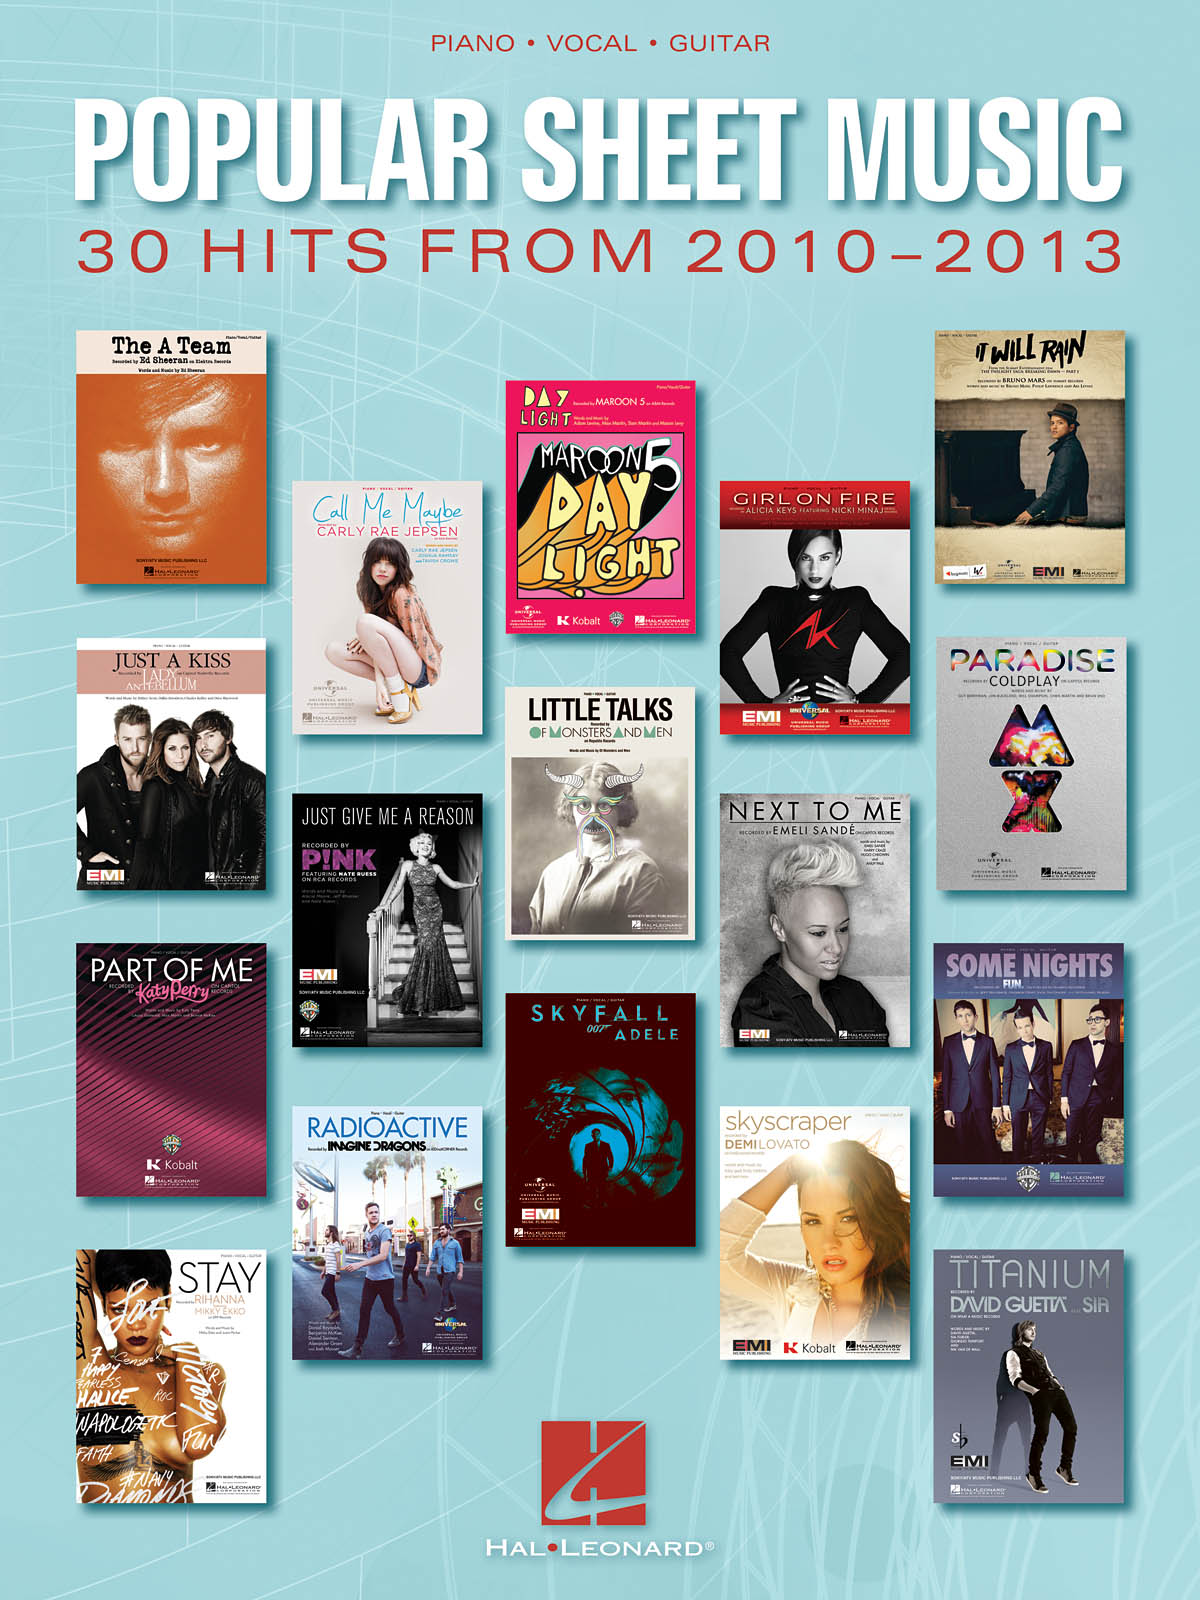 Popular Sheet Music: 30 Hits From 2010-2013